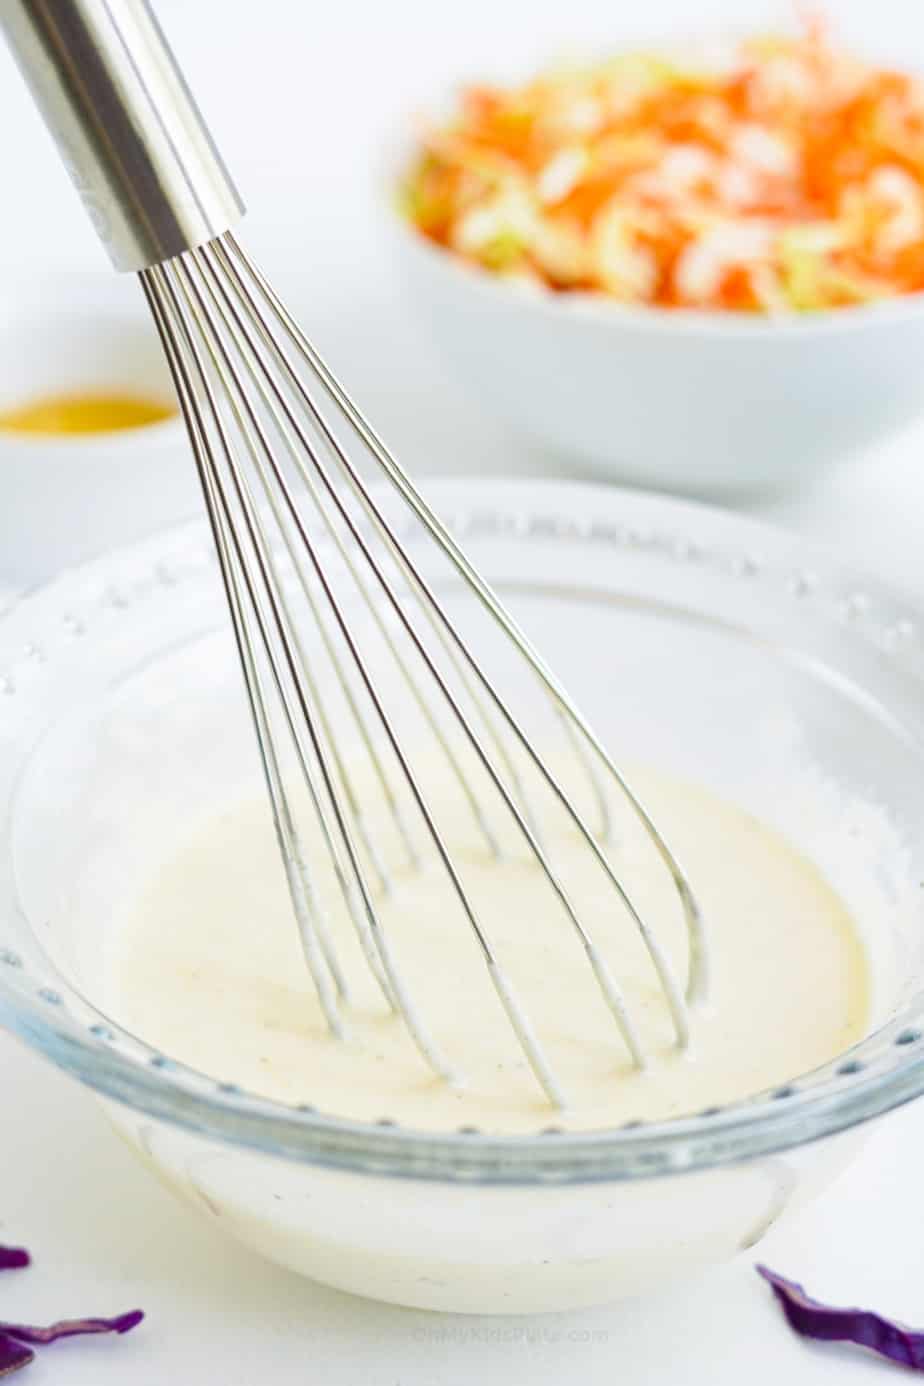 Mixing dressing in a small bowl with a whisk from the side